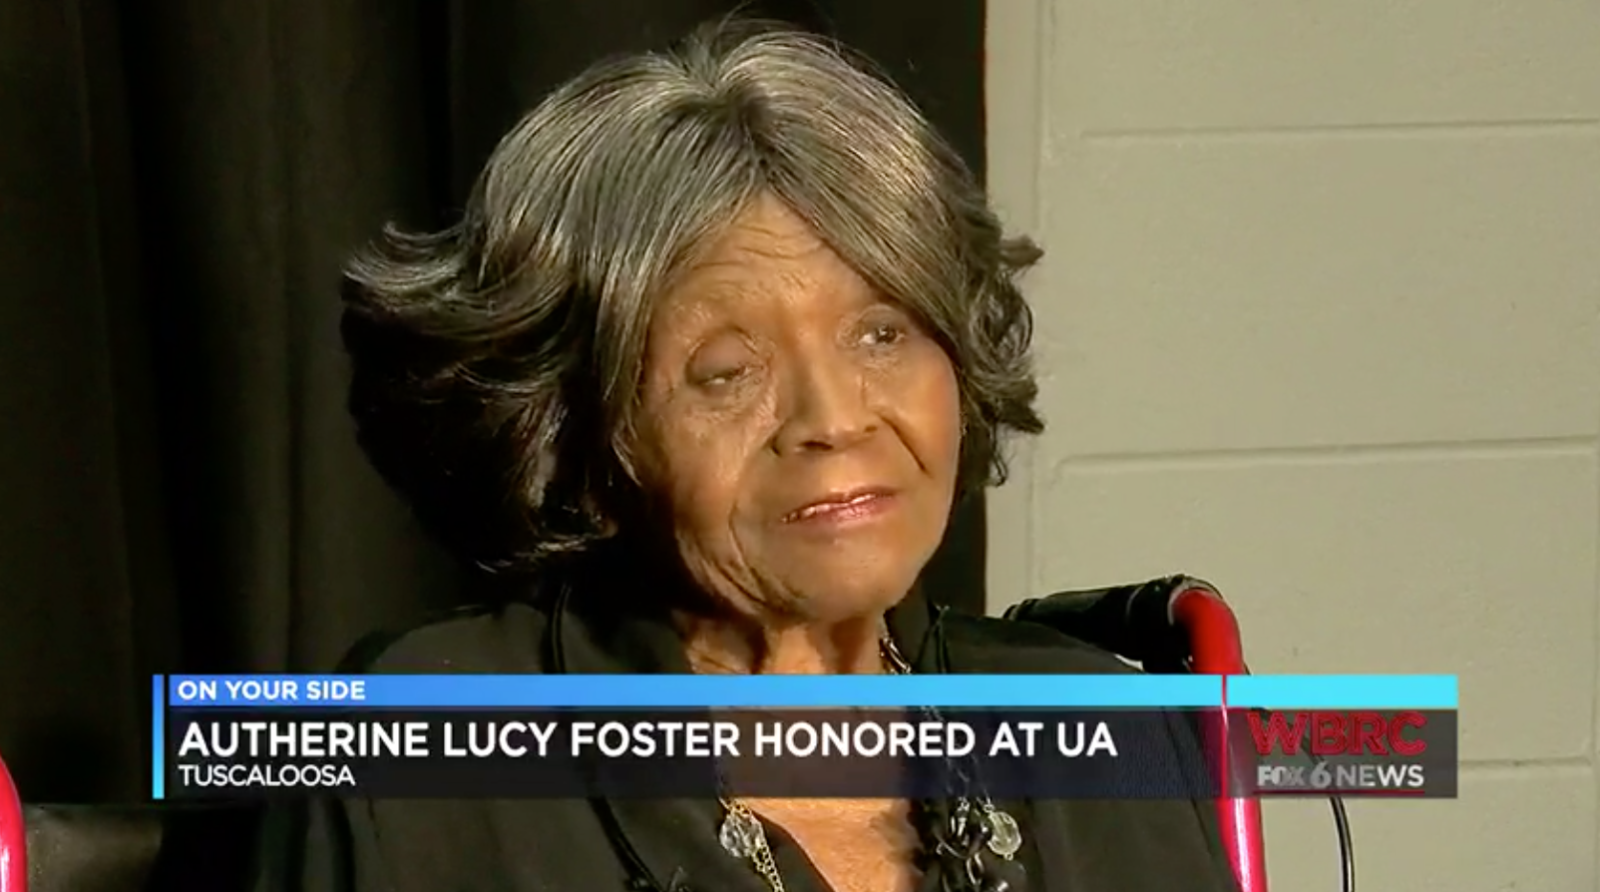 University of Alabama’s First Black Student Receives Honorary Degree 63 Years After Expulsion